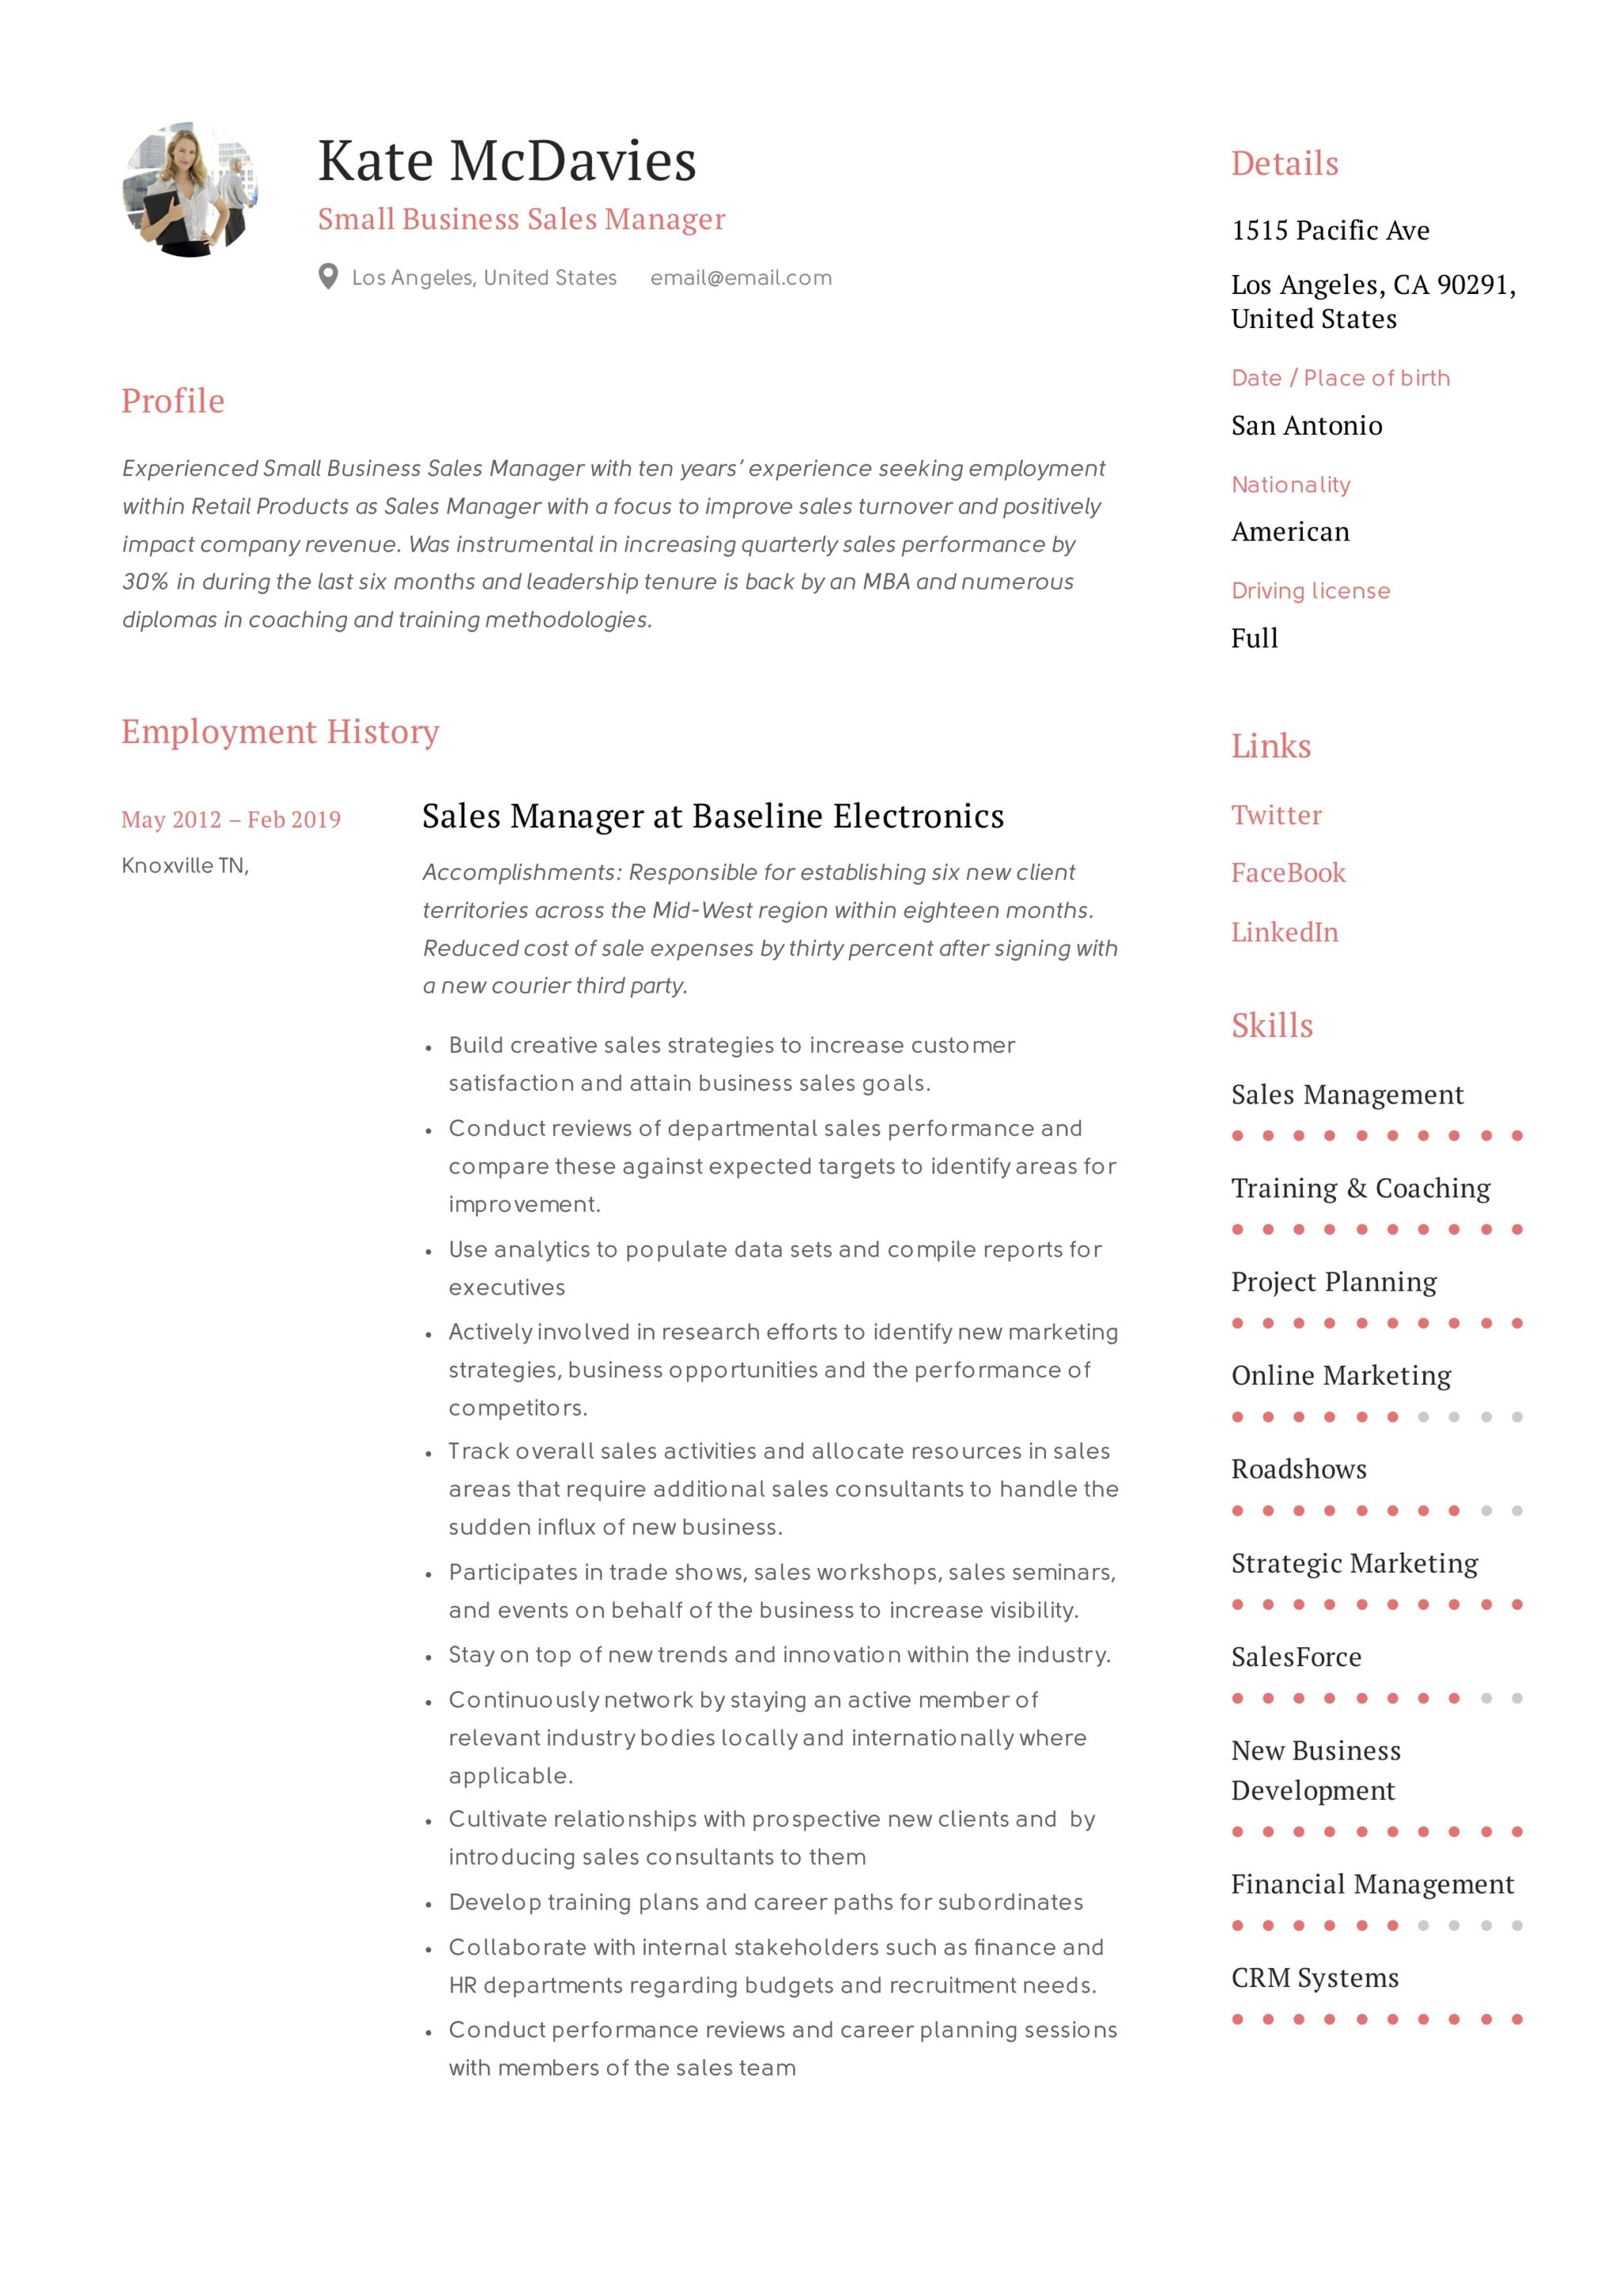 Small Business Sales Manager Resume Example (6)